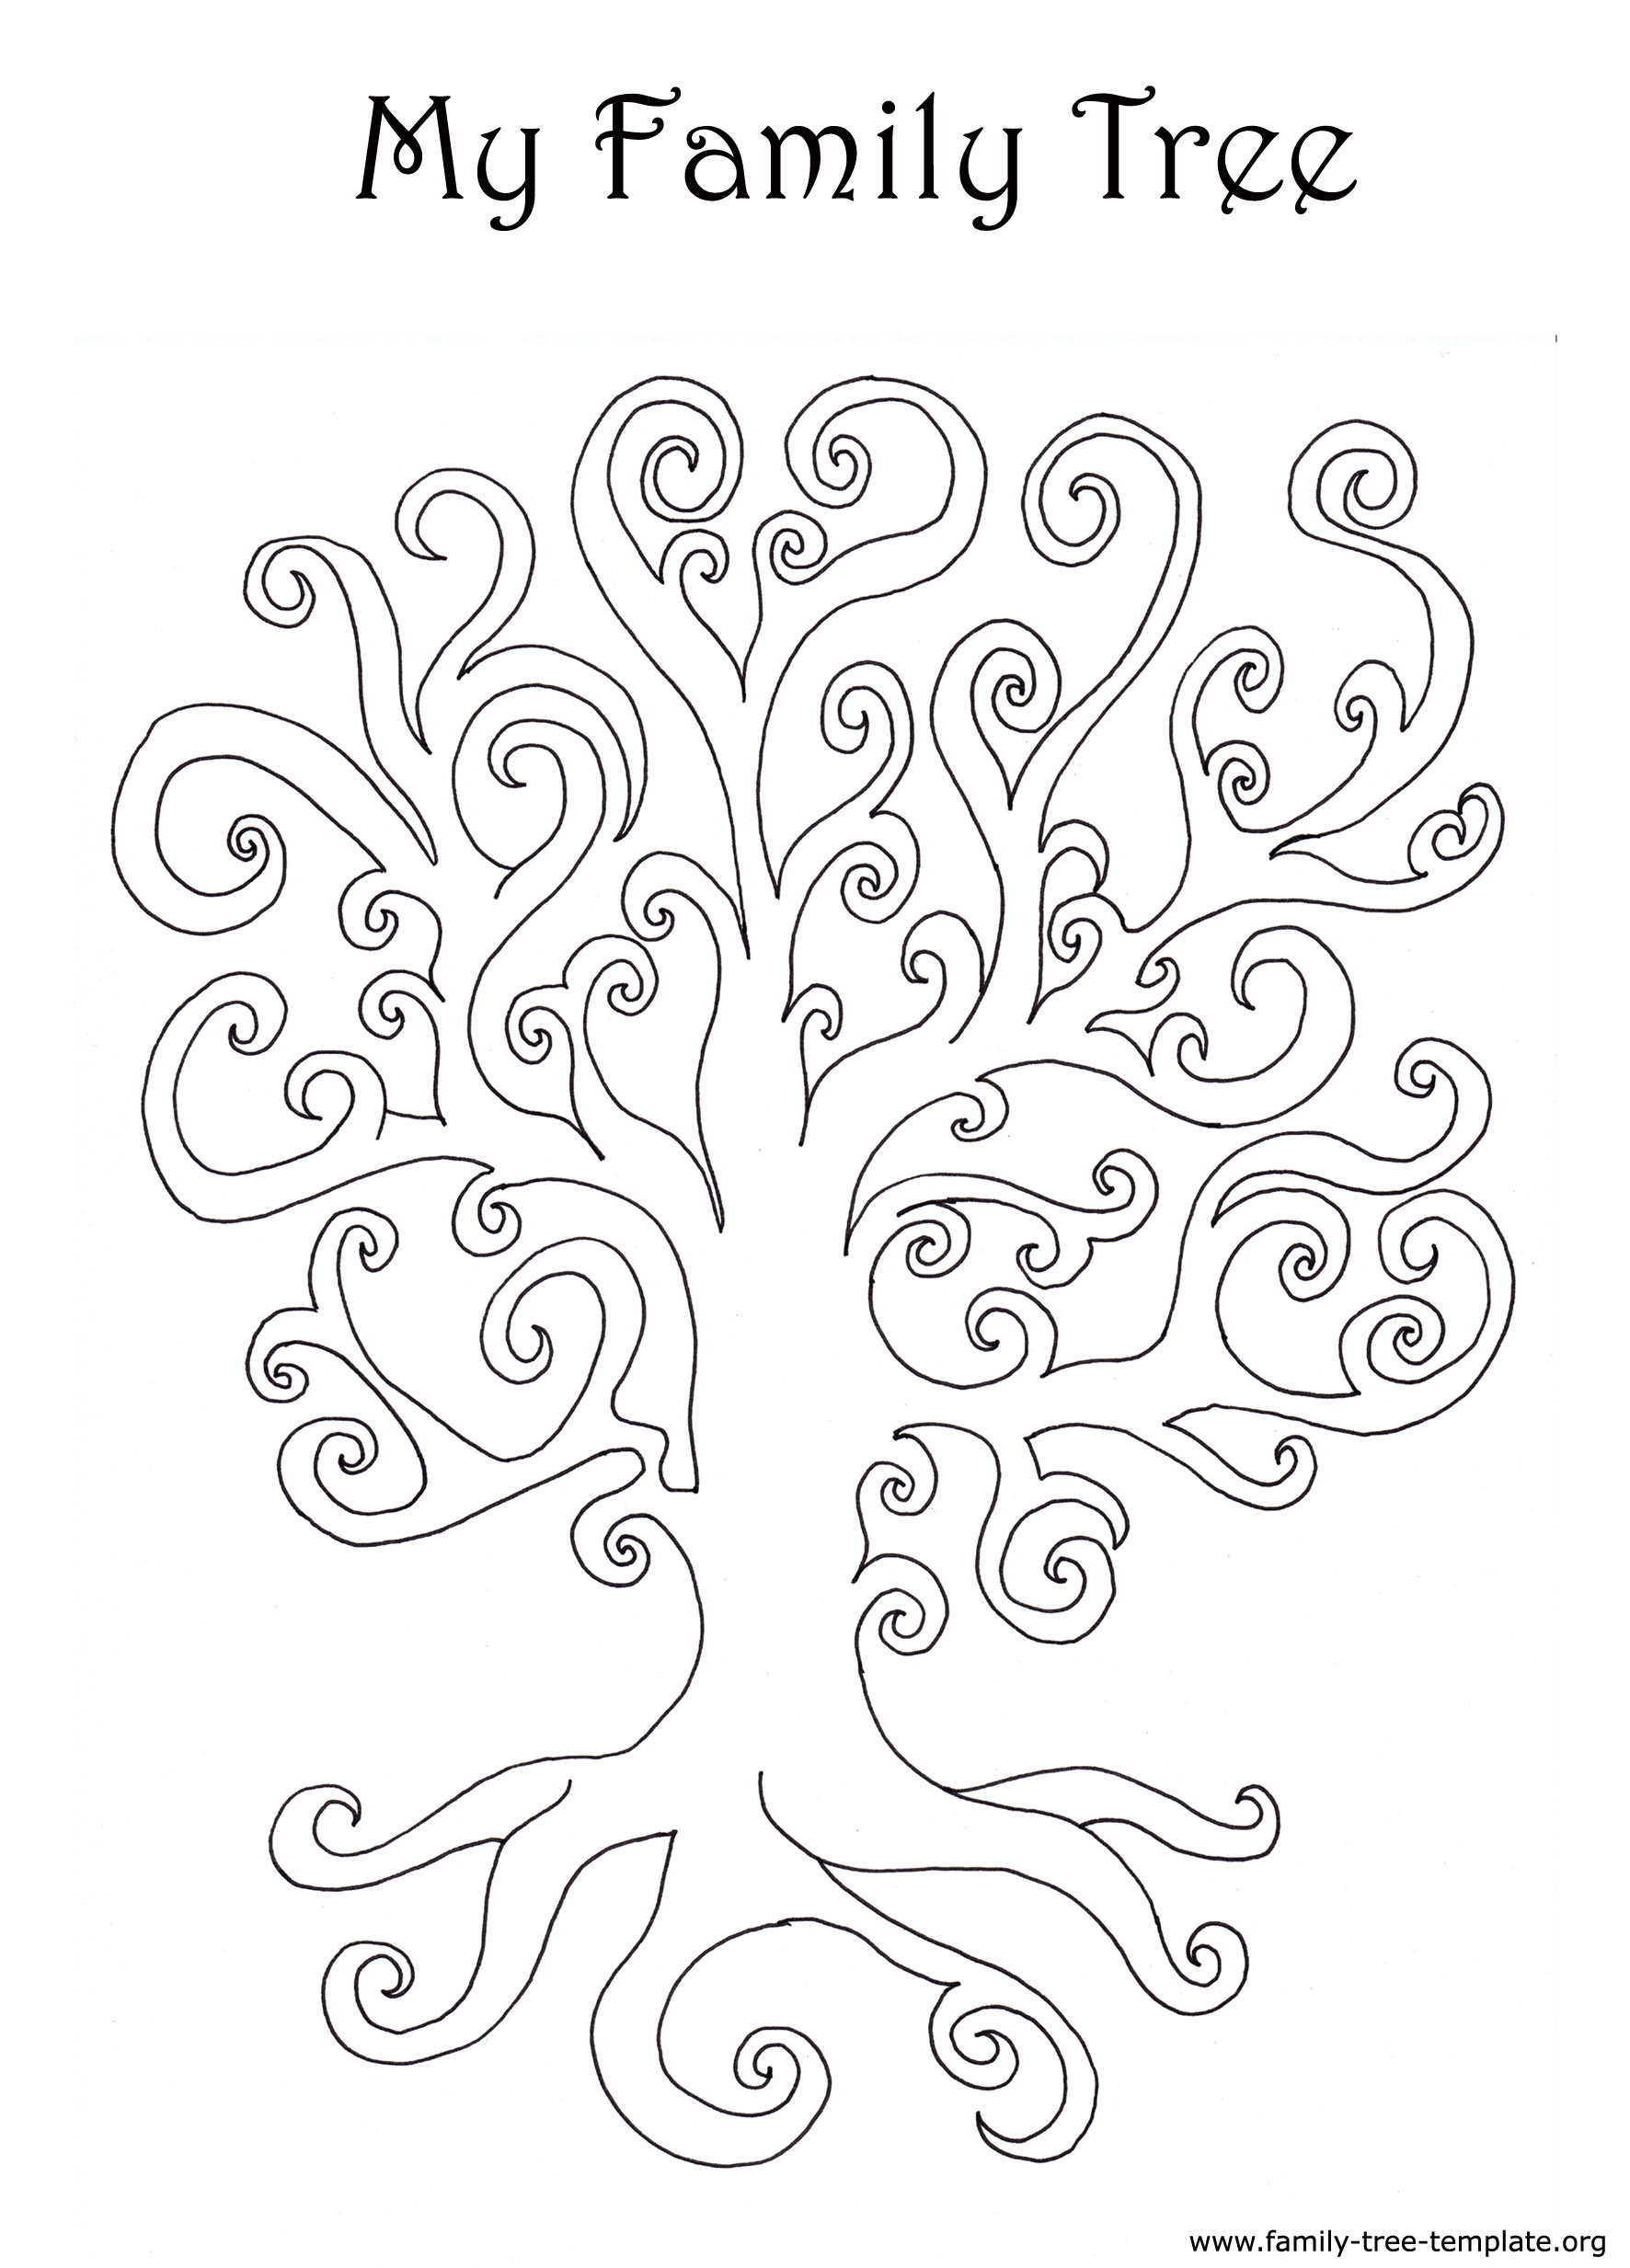 A curly art nouveau tree to fill out with color